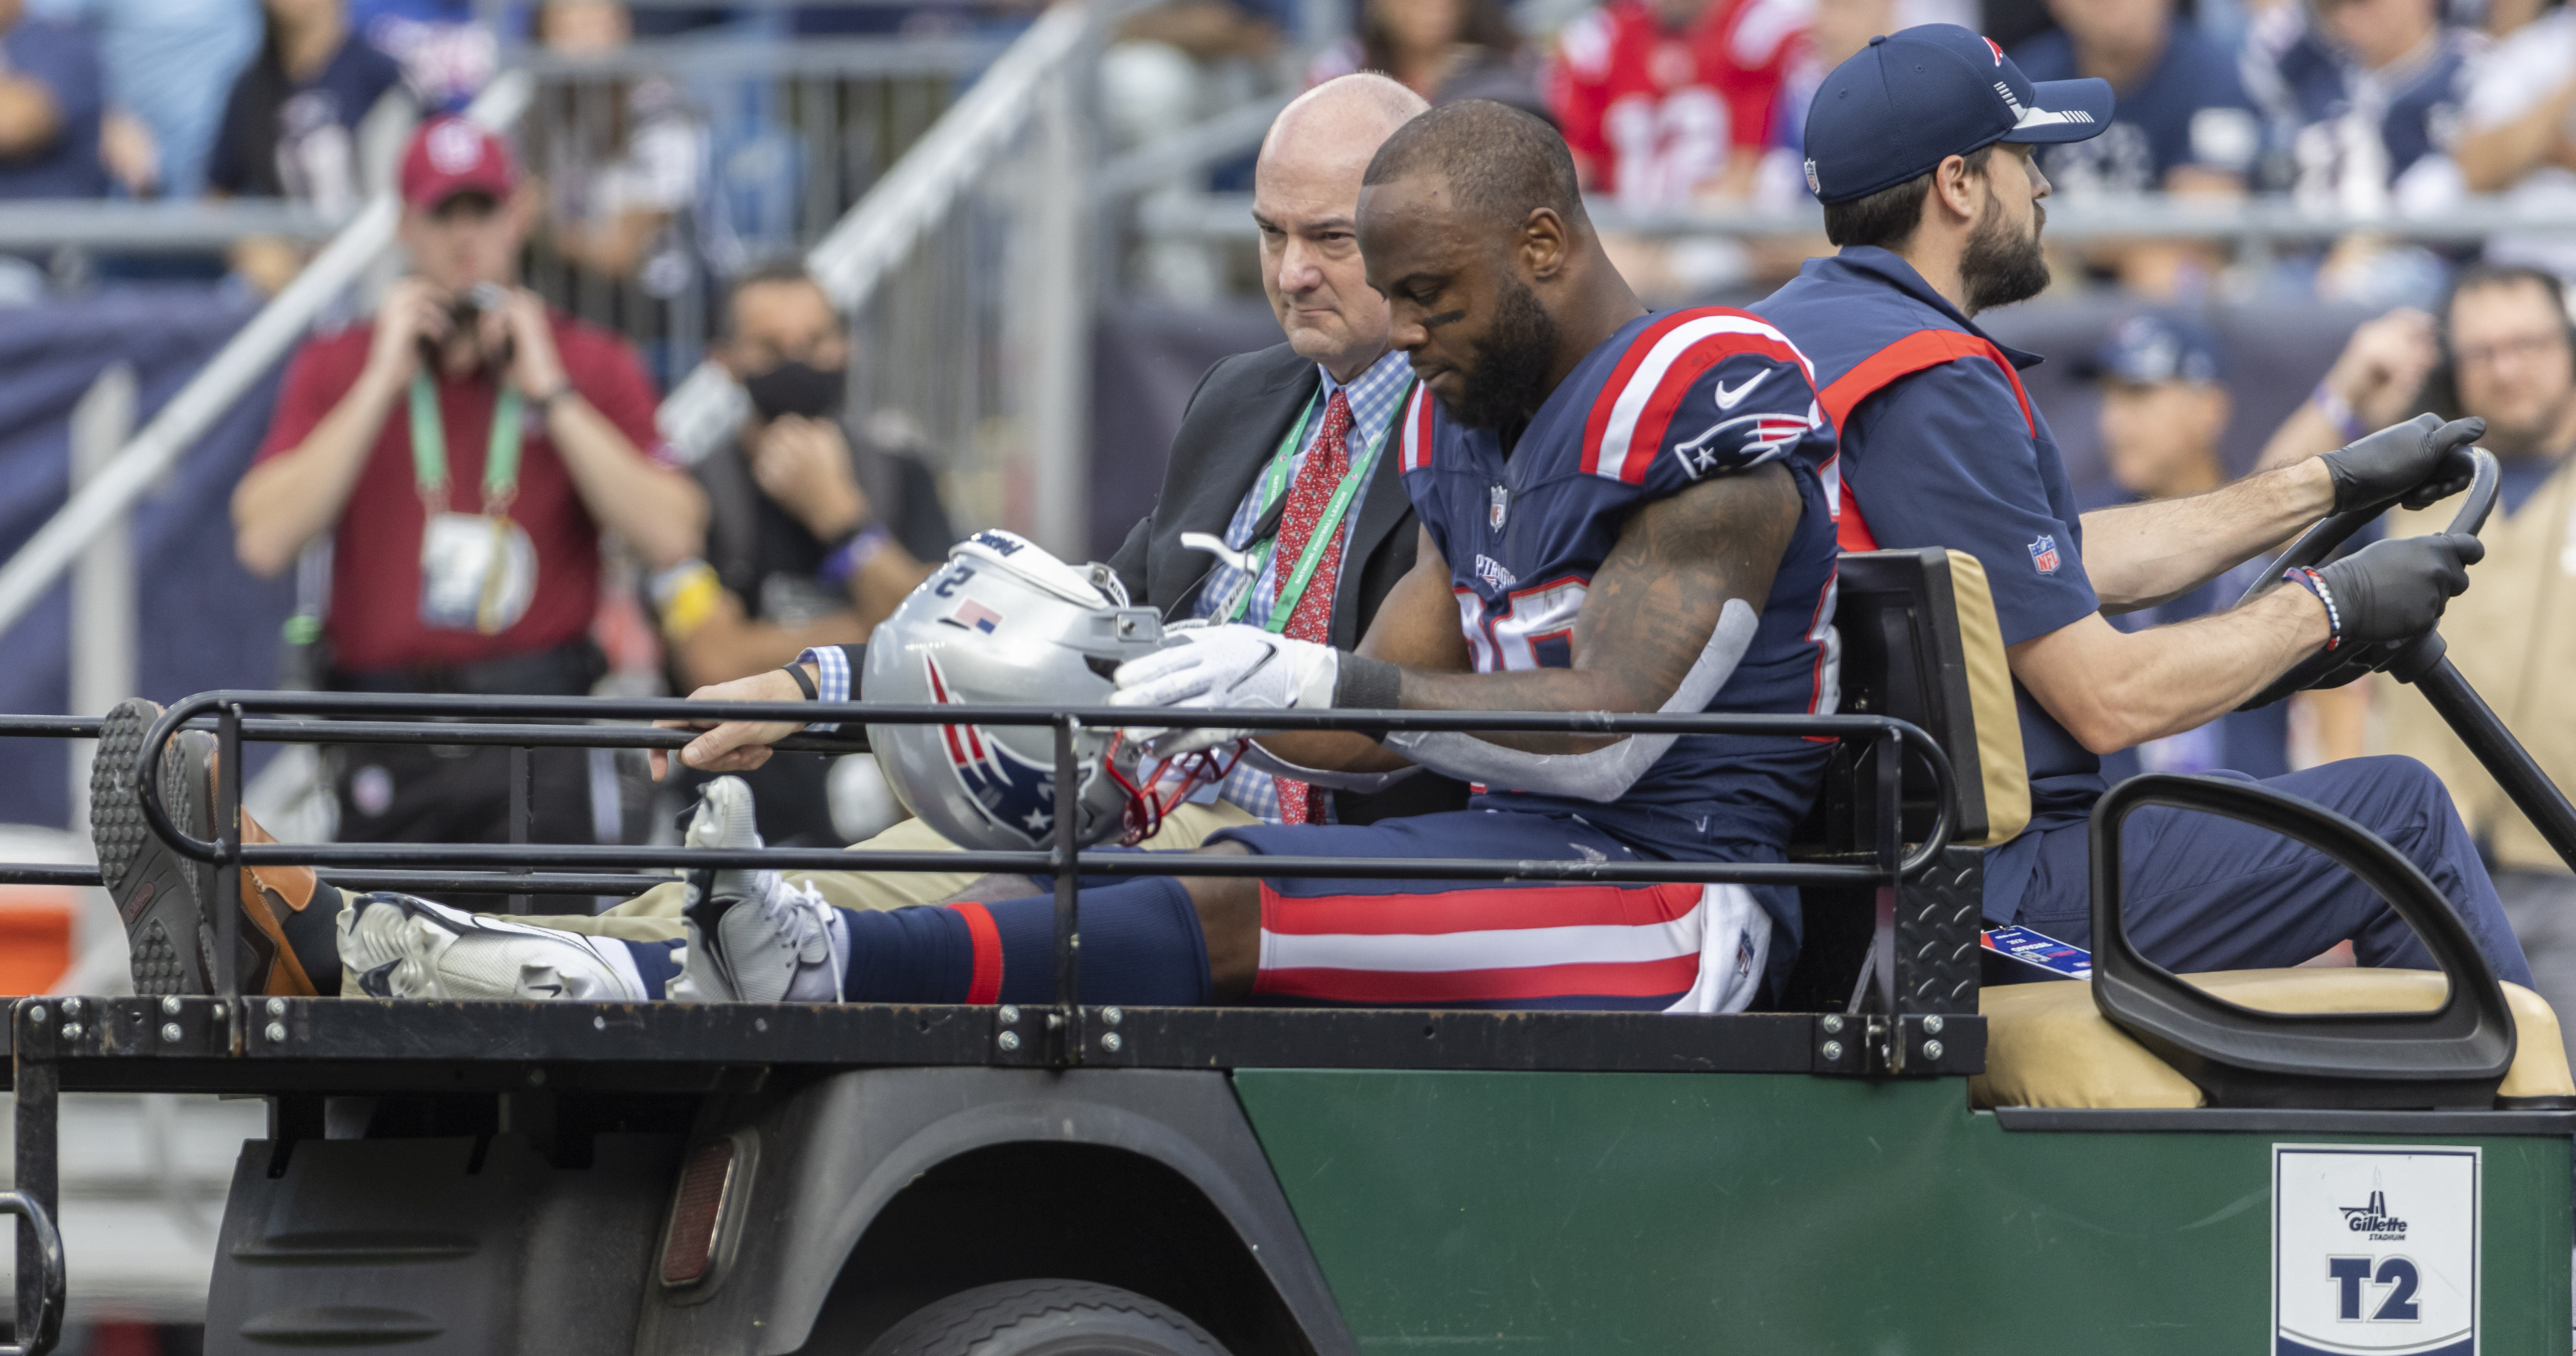 Why is James White not playing with the Patriots?